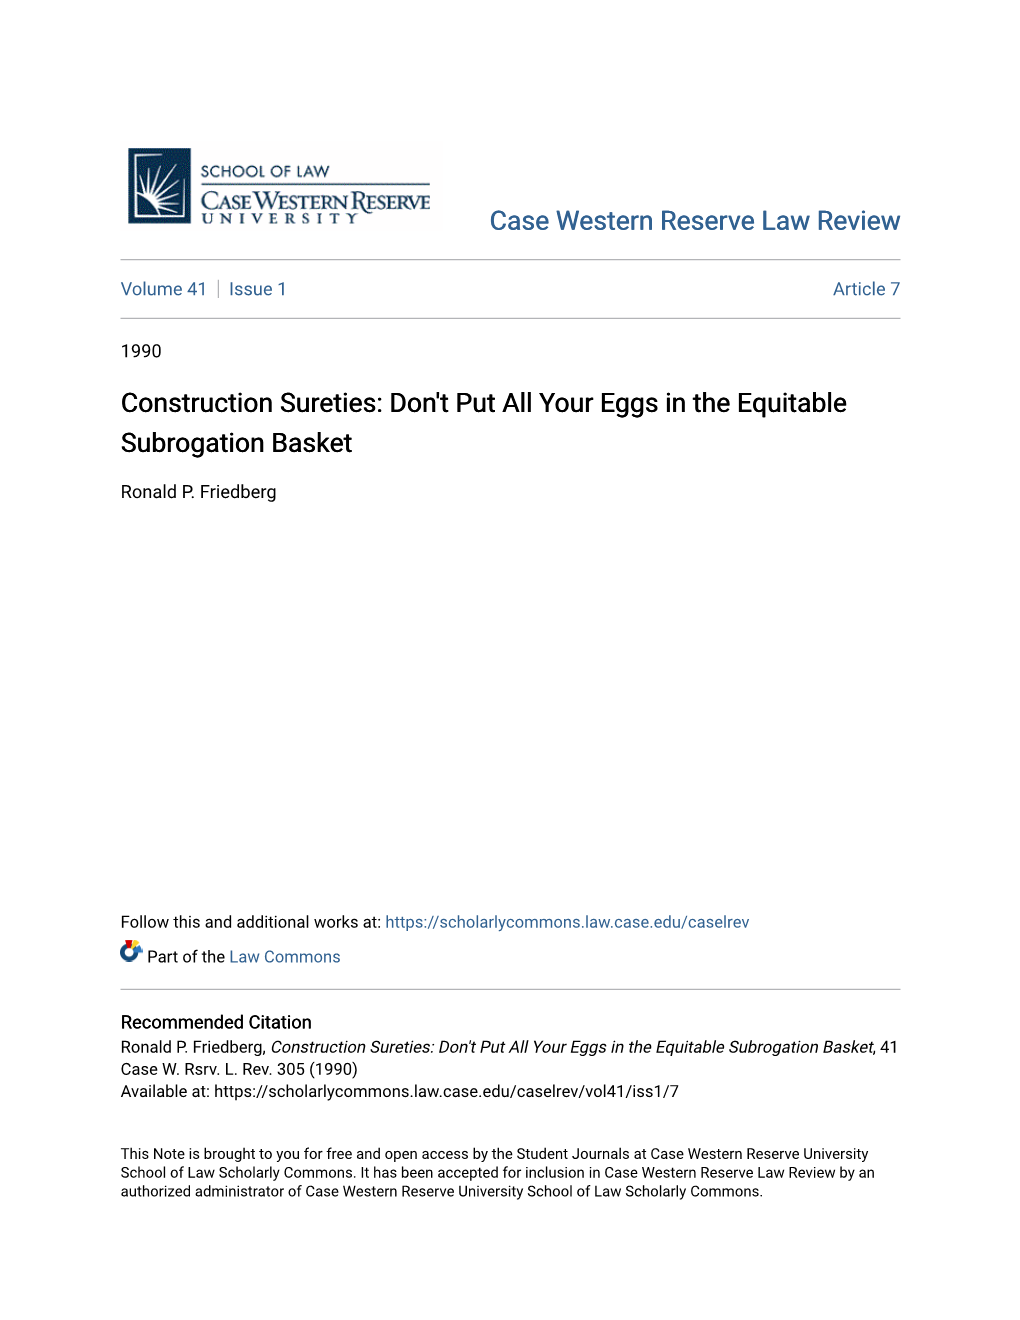 Don't Put All Your Eggs in the Equitable Subrogation Basket